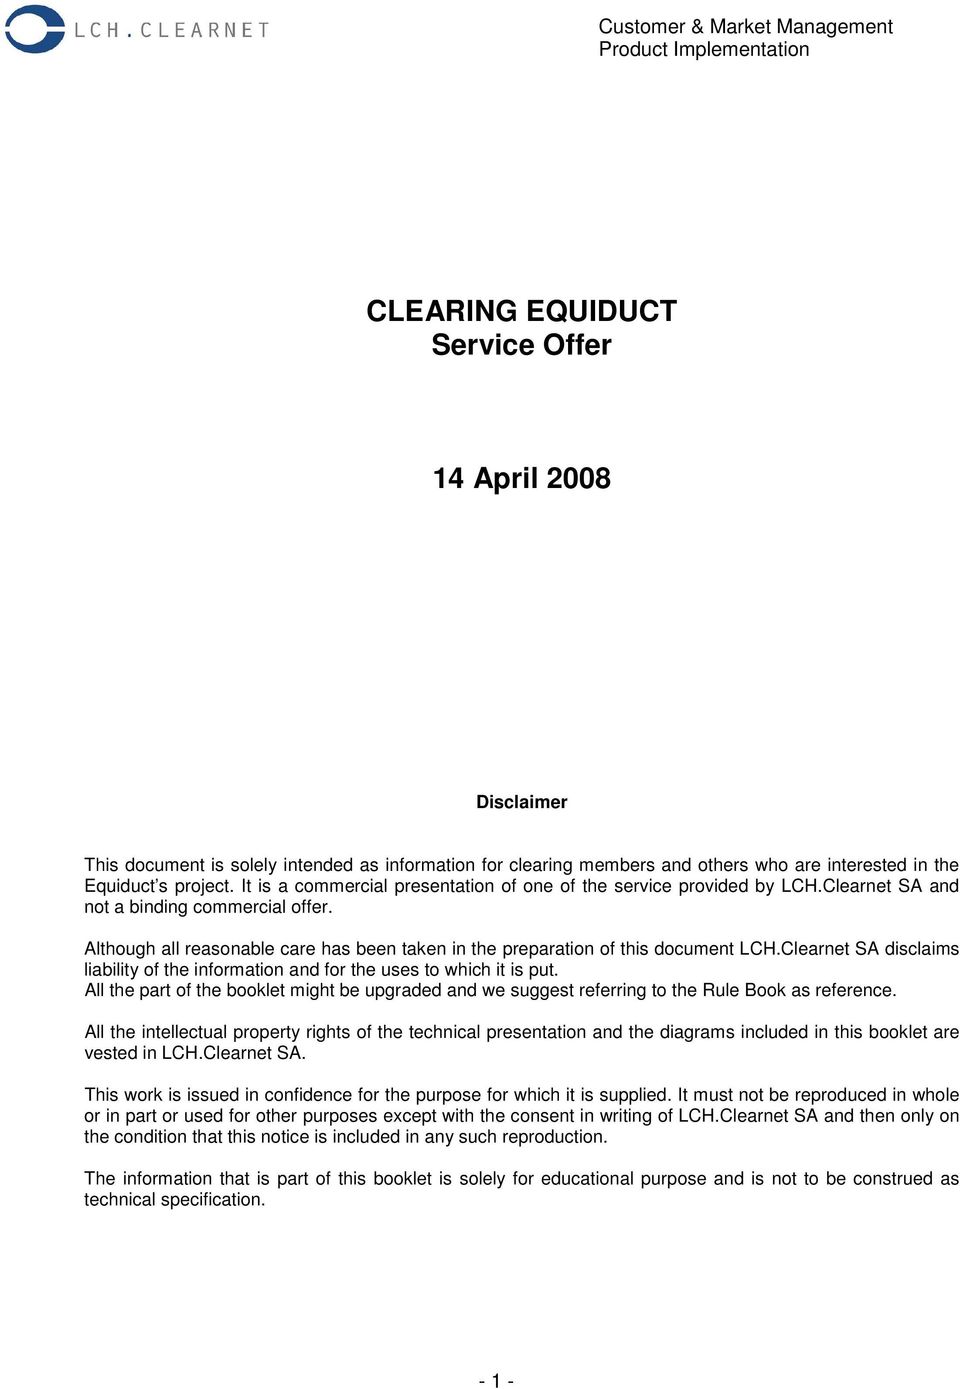 Although all reasonable care has been taken in the preparation of this document LCH.Clearnet SA disclaims liability of the information and for the uses to which it is put.